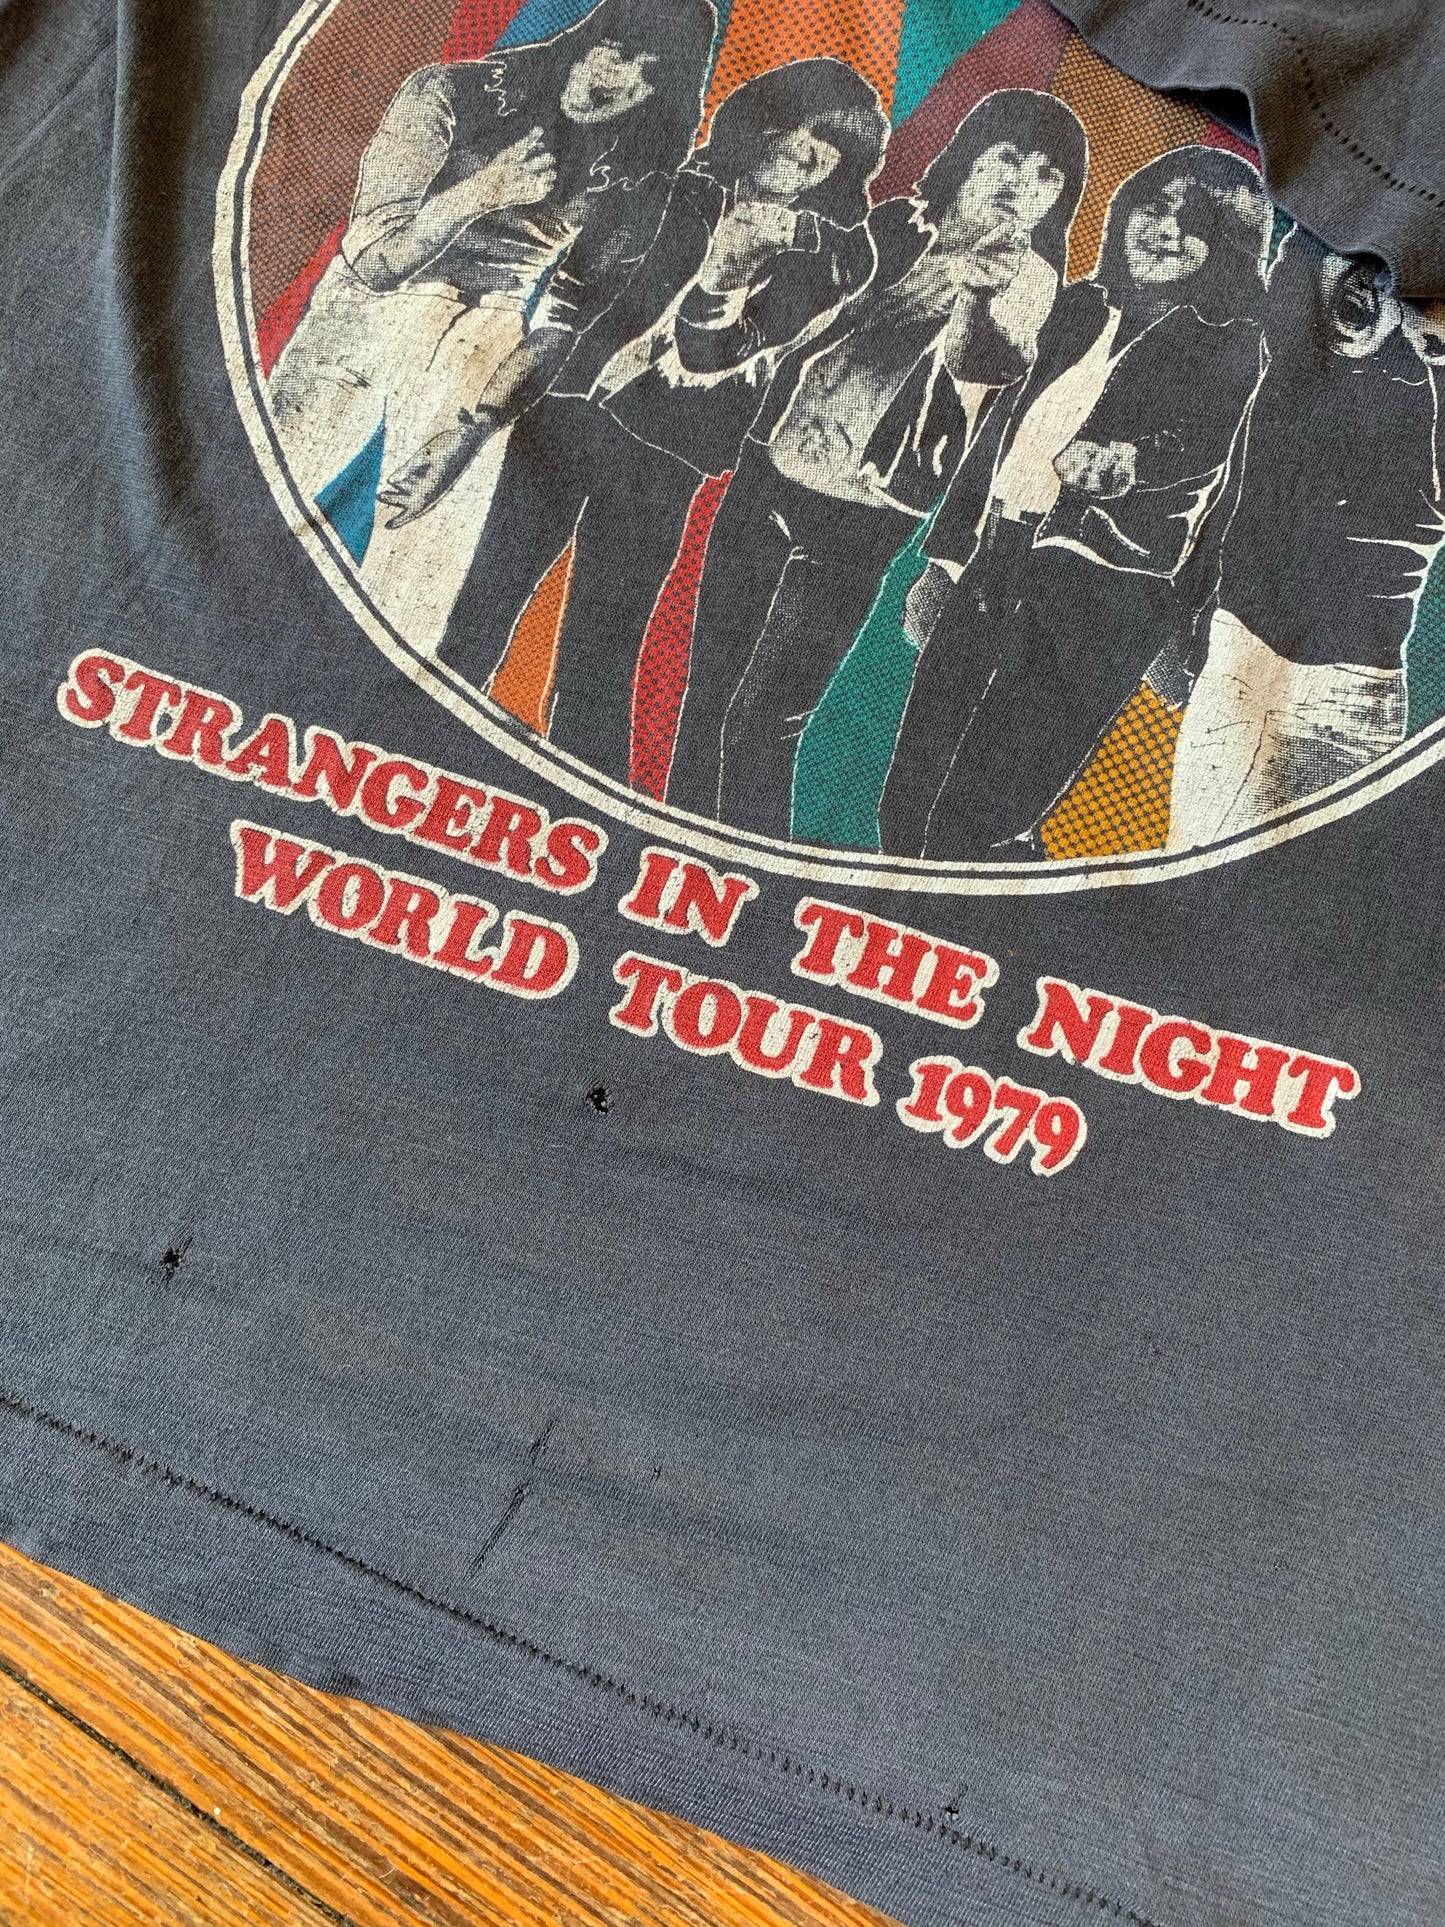 Vintage 1979 UFO “Strangers in the night” Tour Shirt